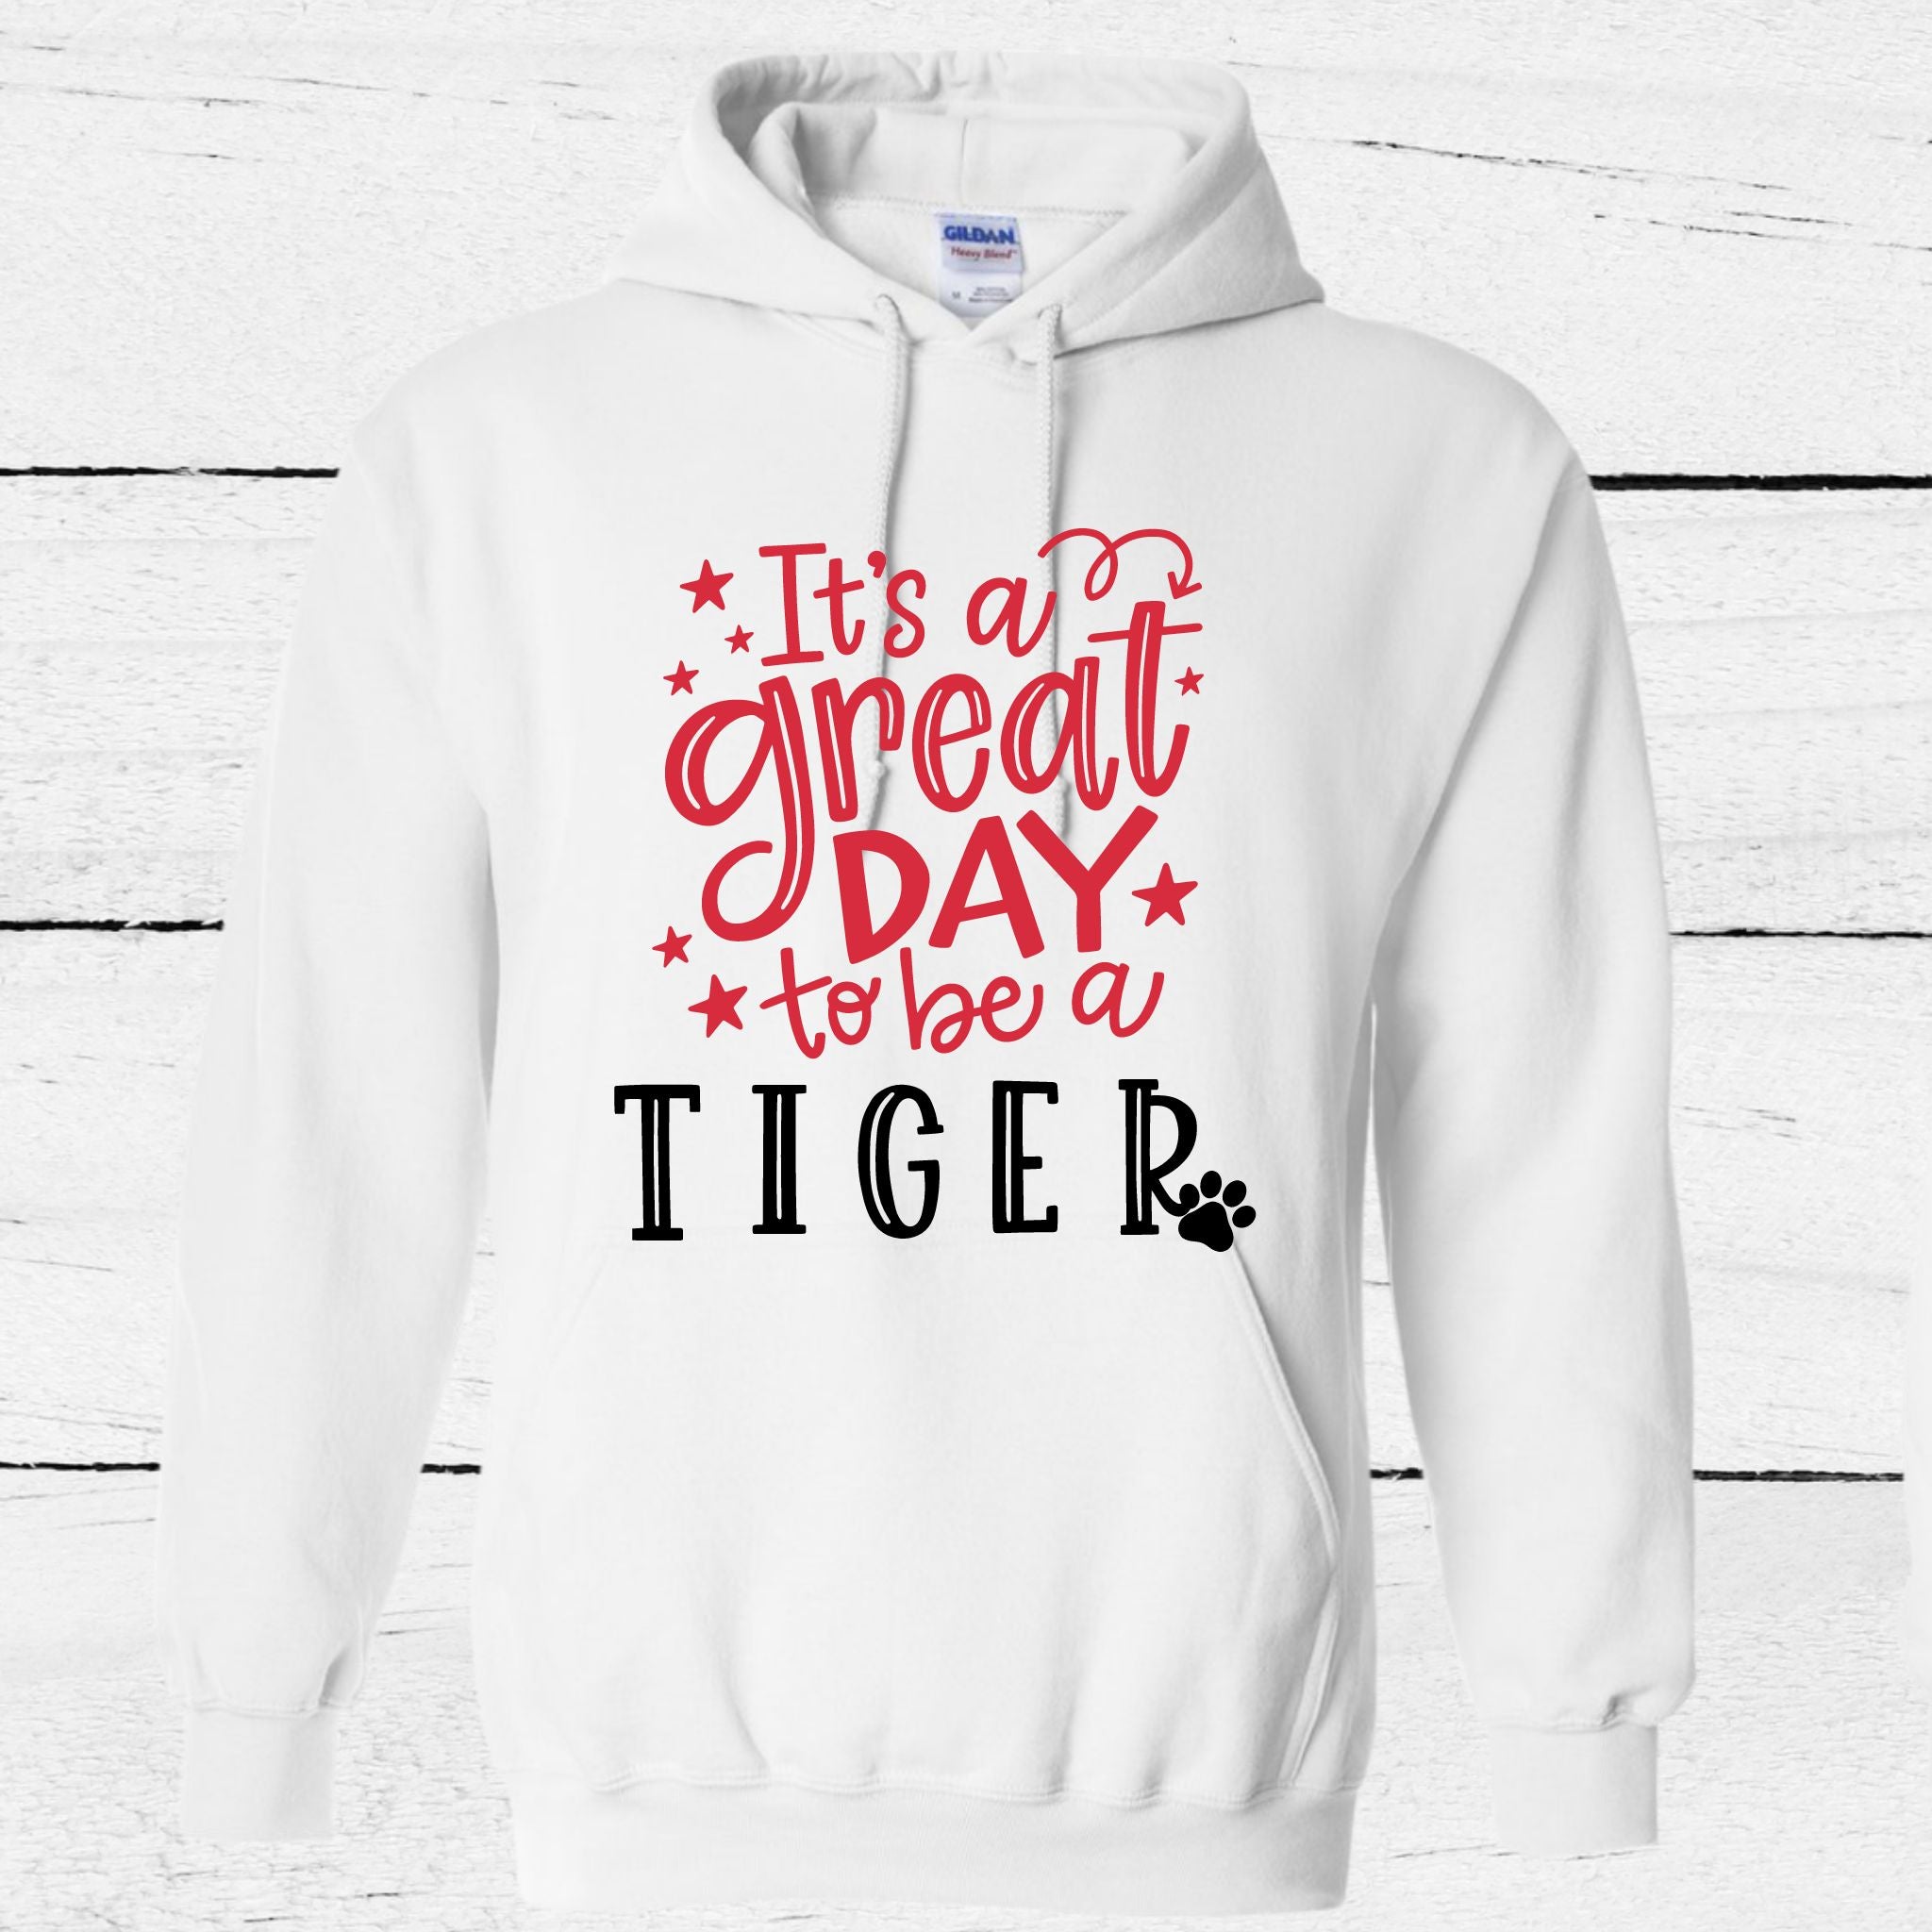 It's a Great Day to be a Tiger Apparel